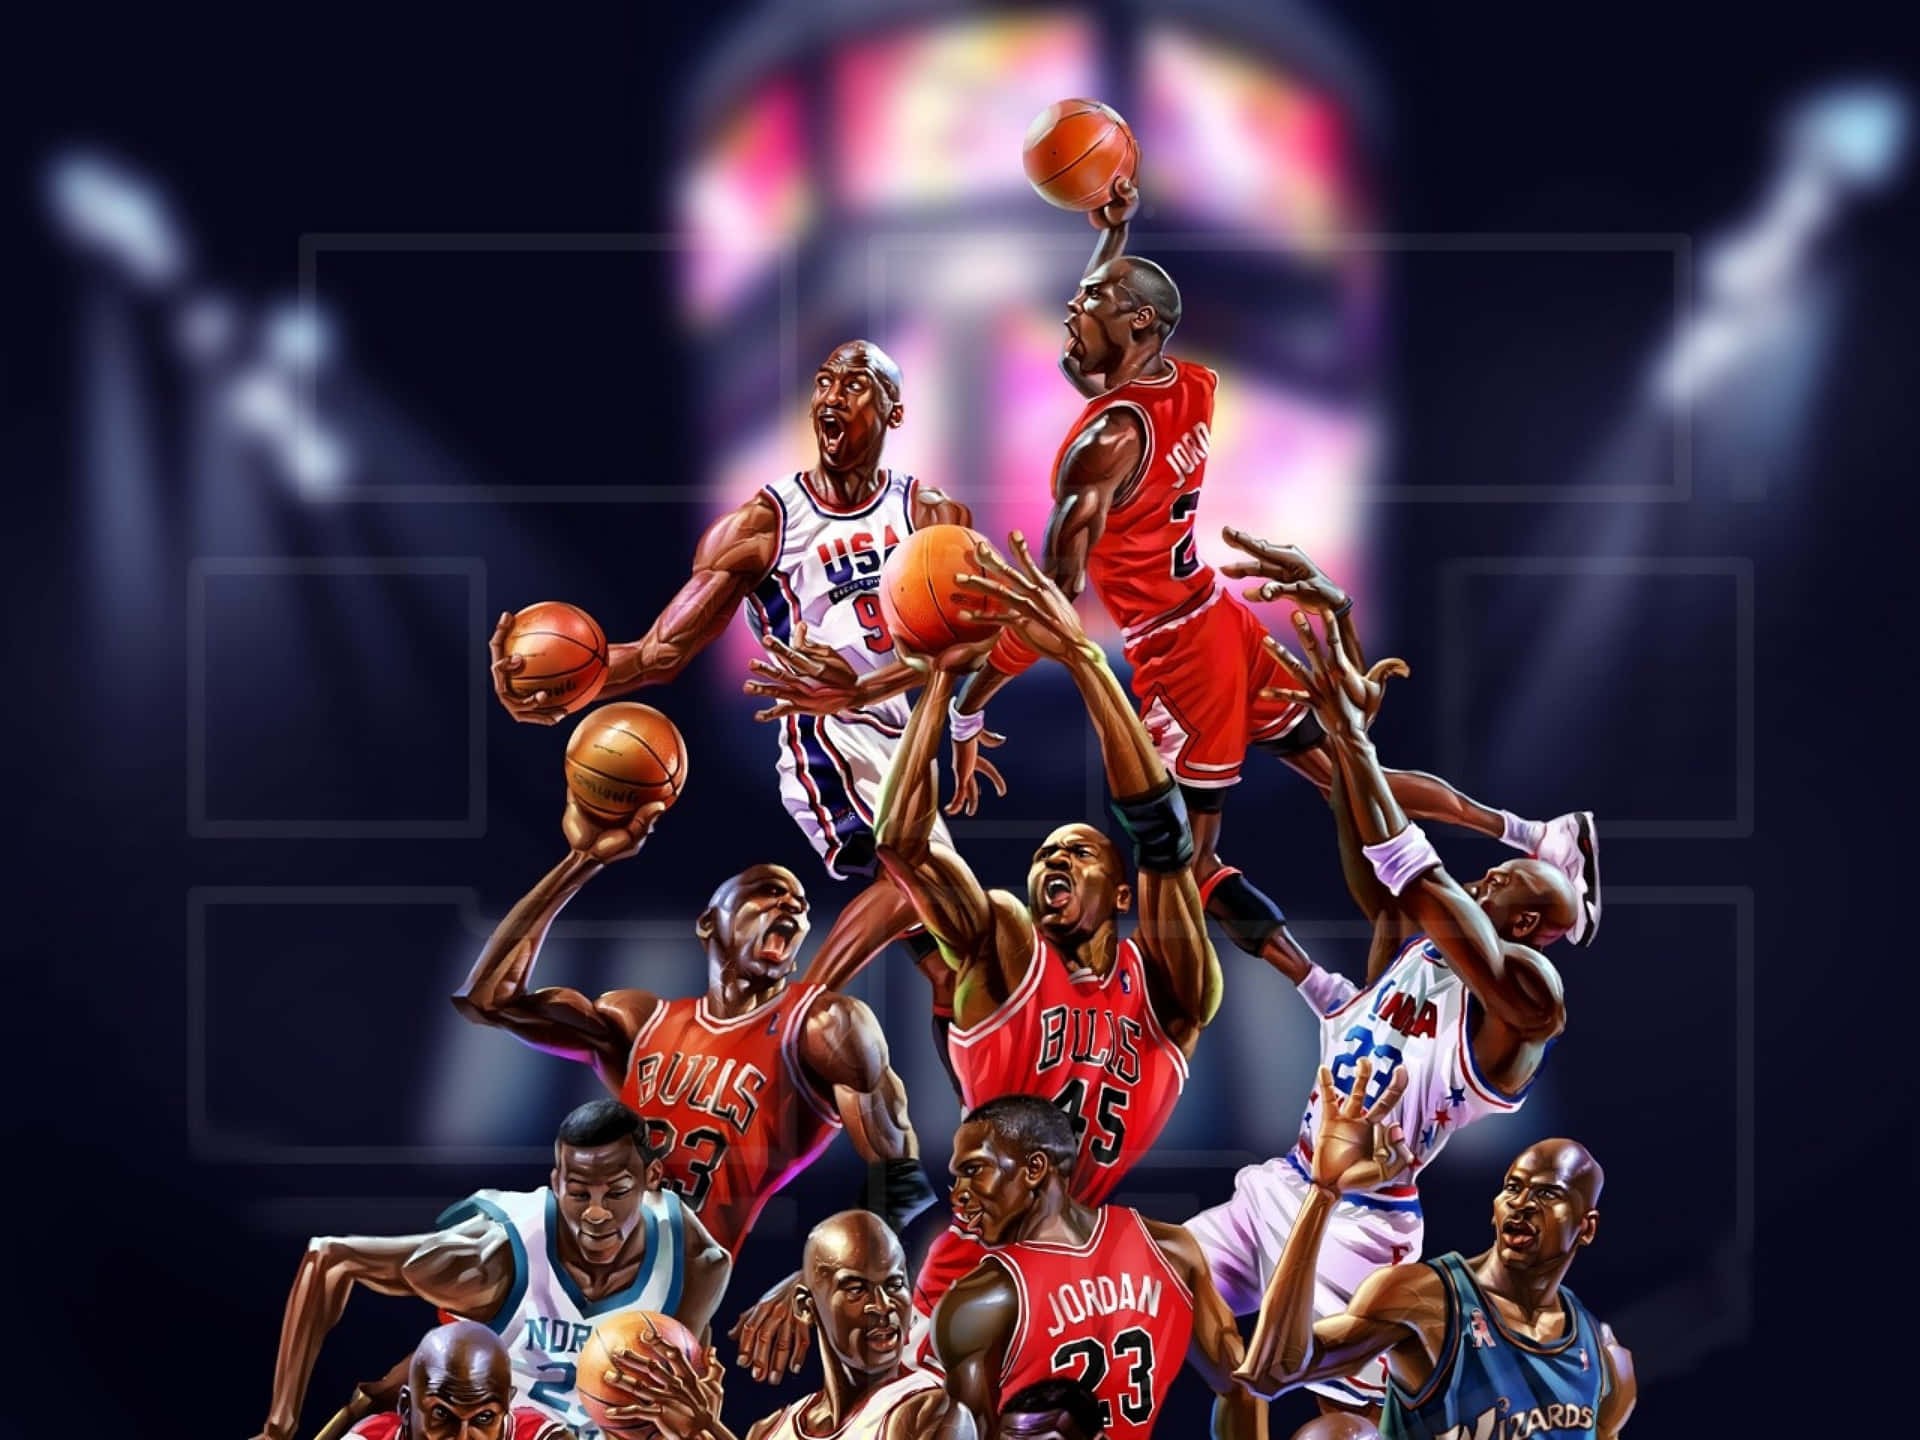 Nba Superstar Players Coming Together For A Team Photo Wallpaper